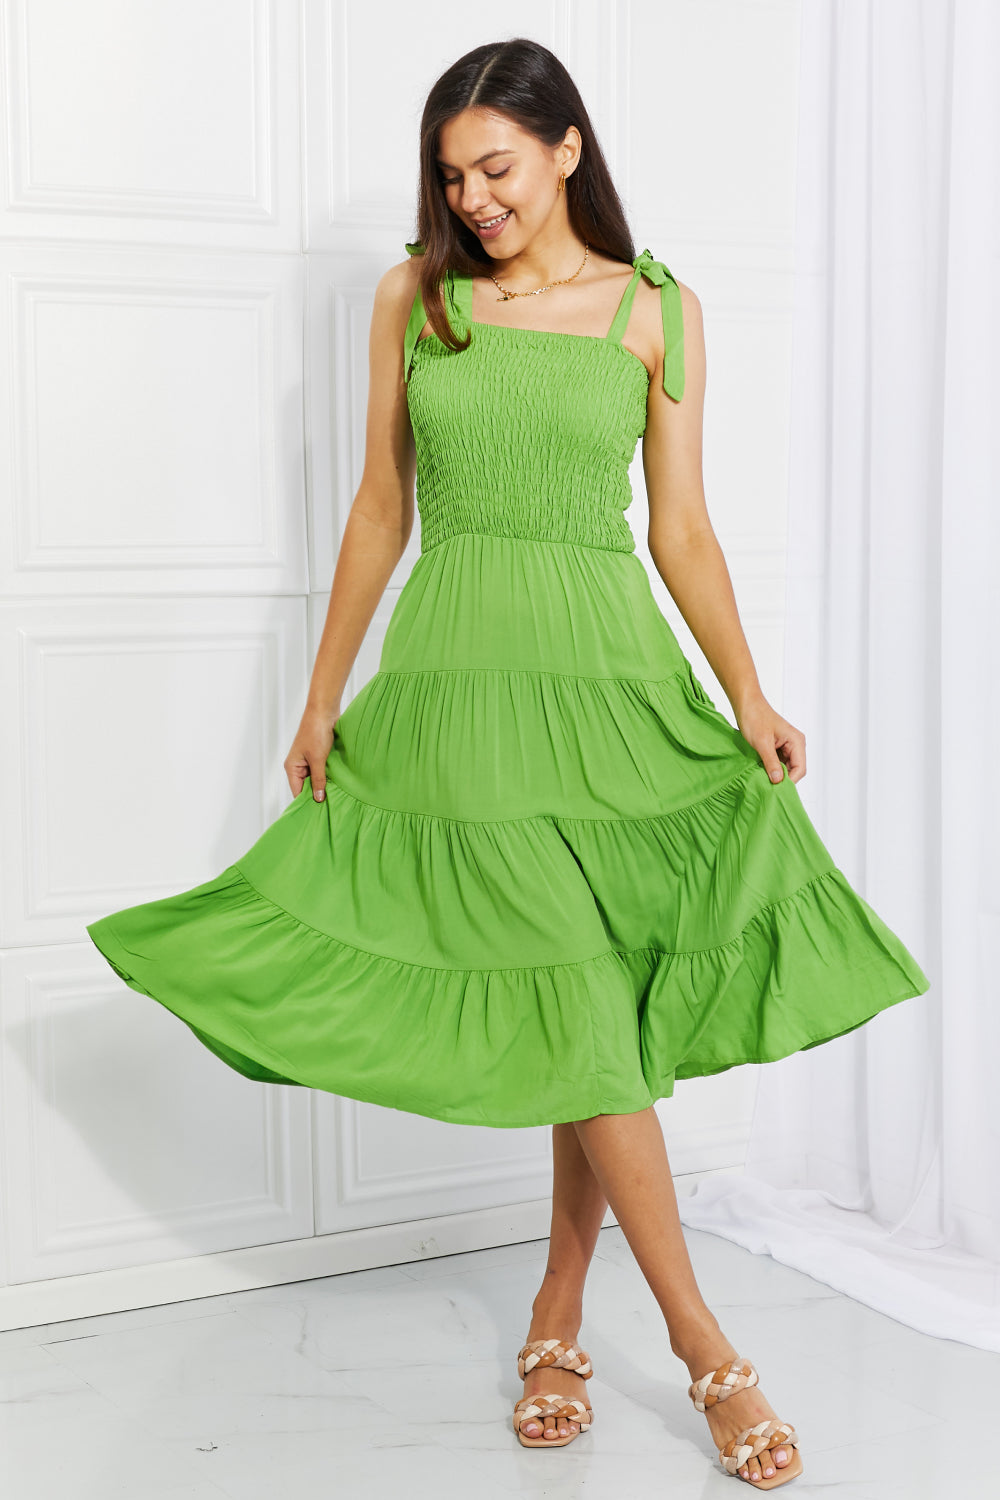 LIME Culture Code Full Size Summer Solstice Smocked Tiered Dress - Ships from The US - women's dress at TFC&H Co.